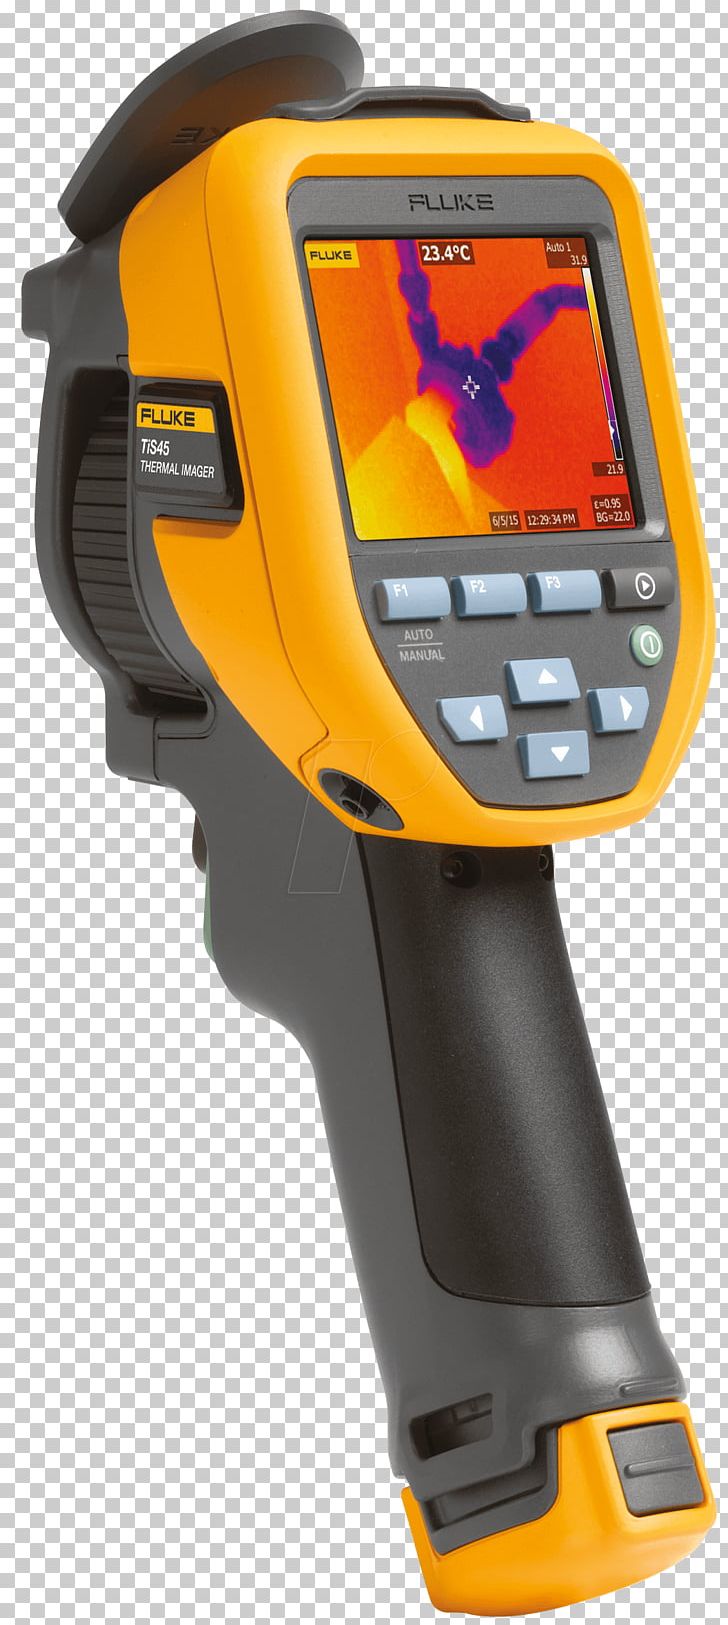 Thermographic Camera Thermography Fluke Corporation Thermal Imaging Camera PNG, Clipart, Angle, Camera, Display Device, Fixedfocus Lens, Fluke Free PNG Download